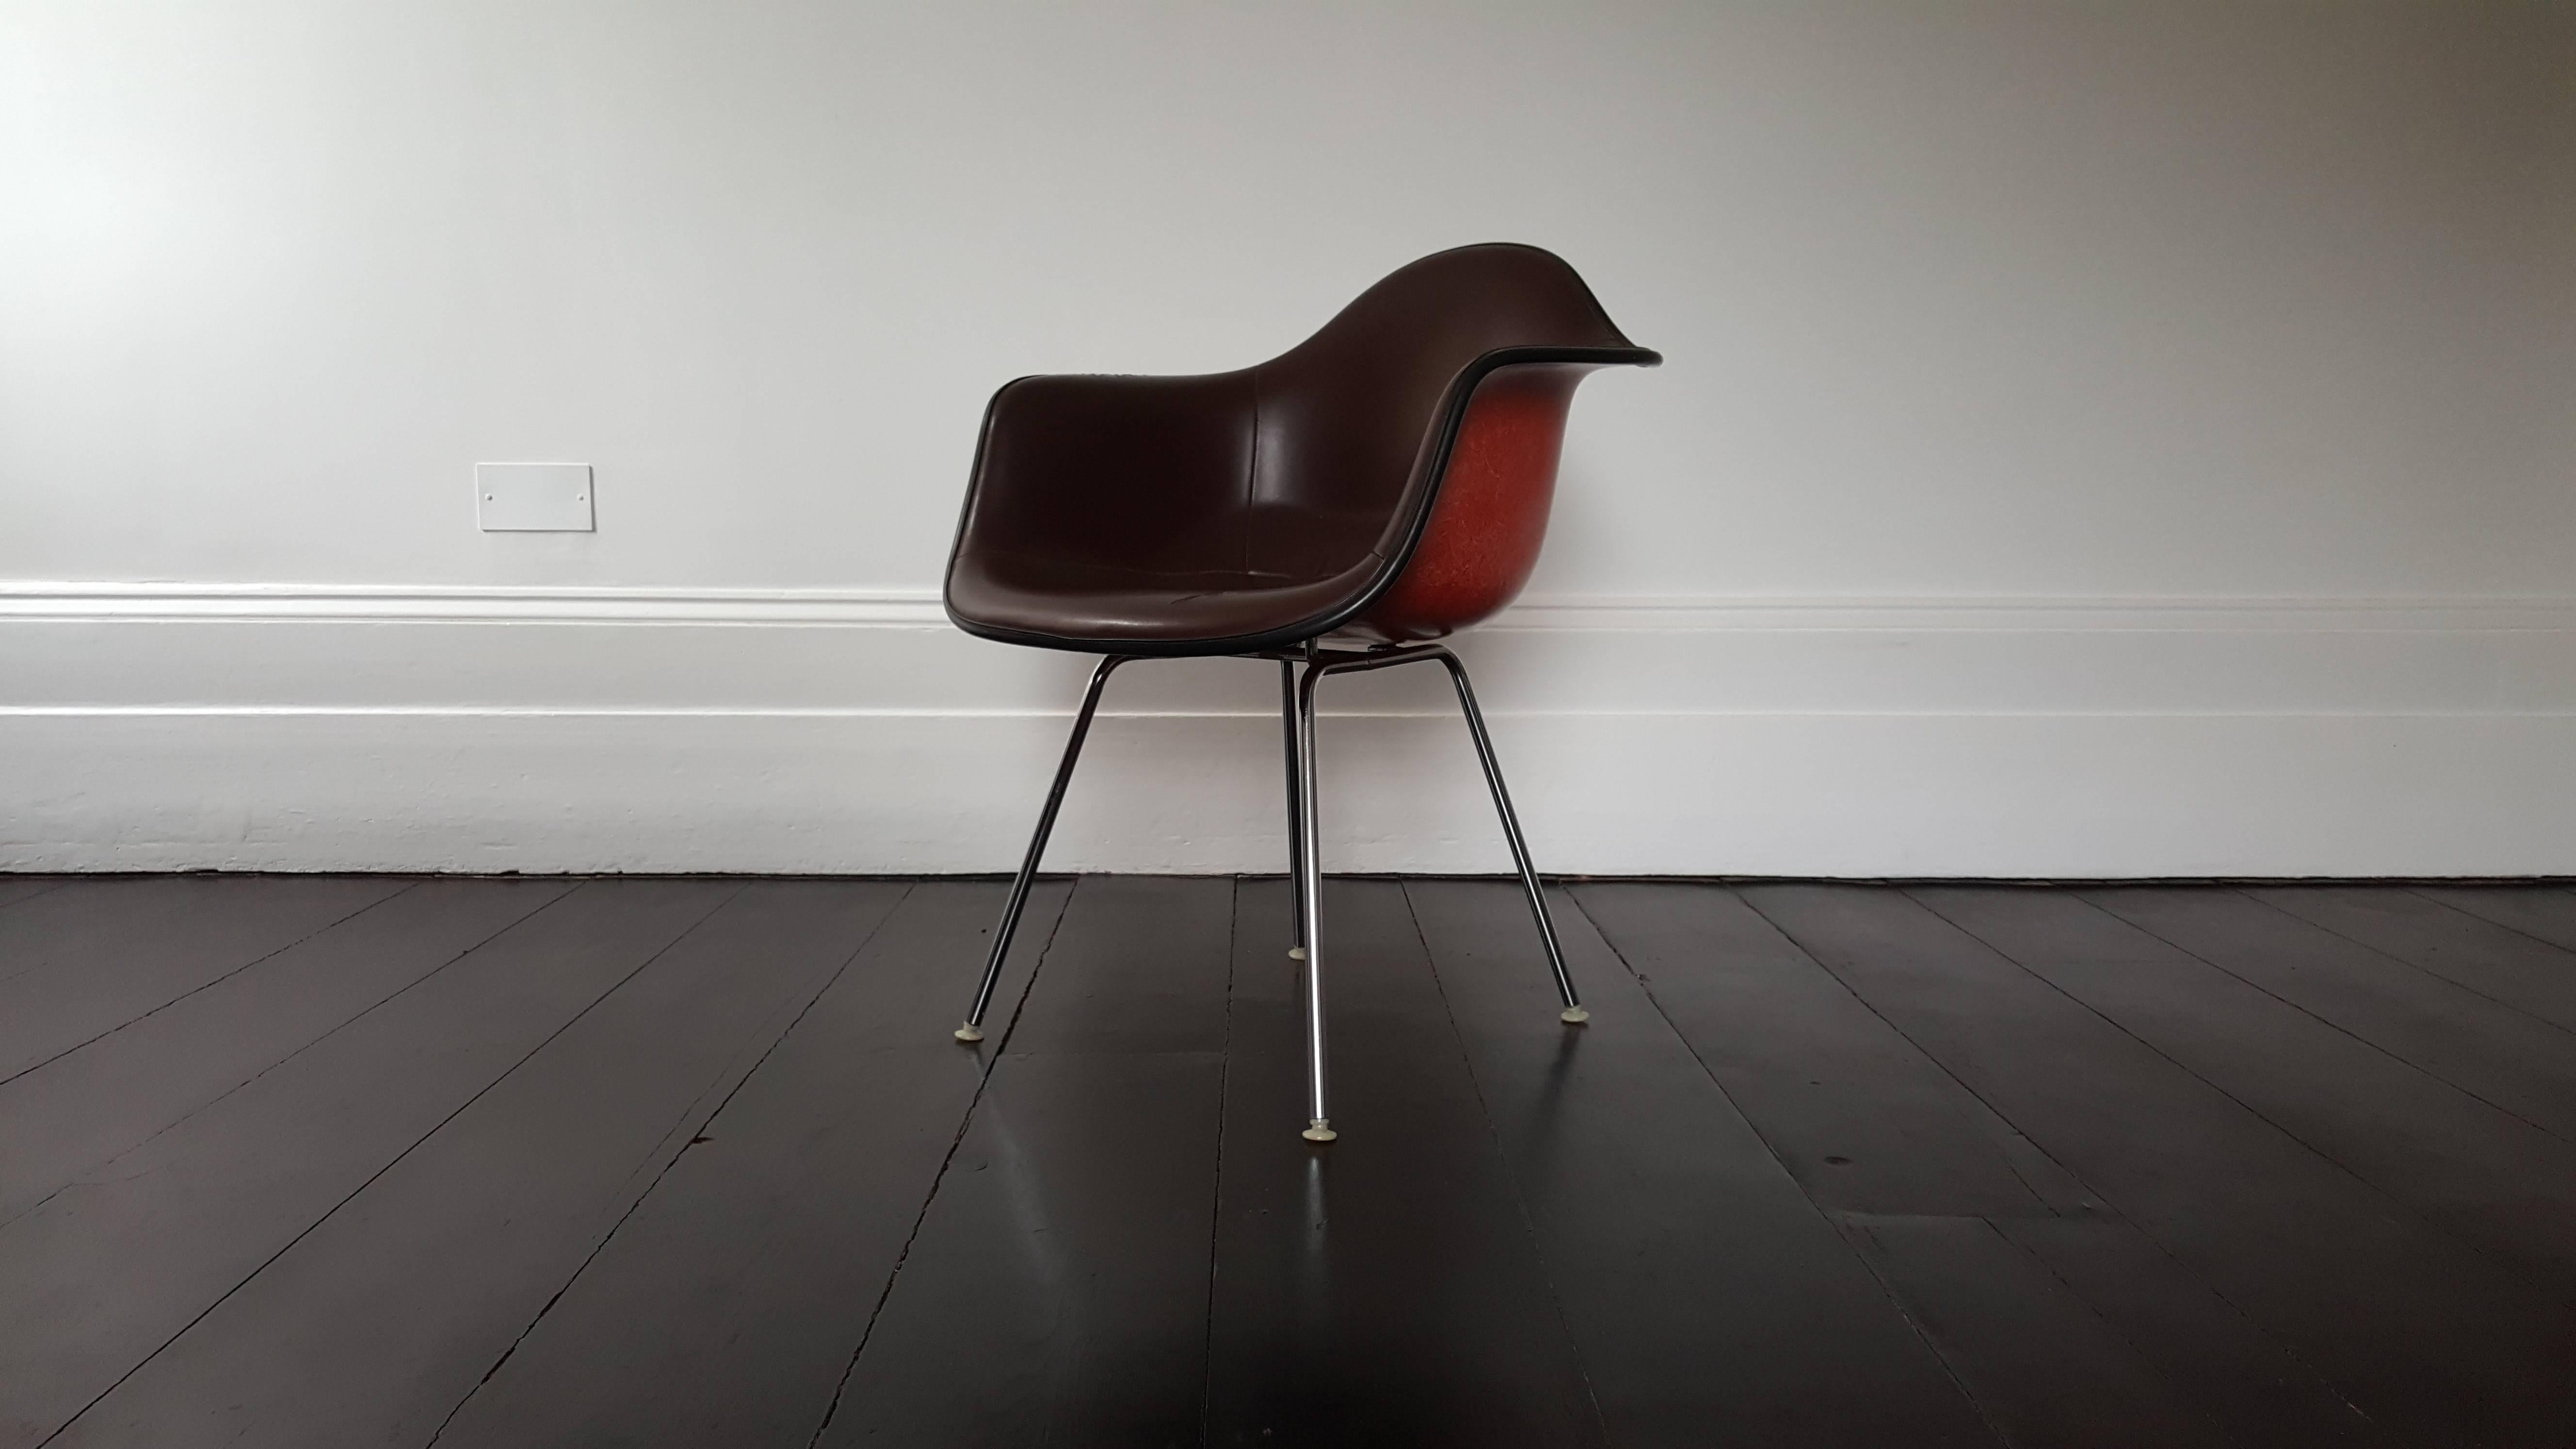 Original vintage Charles & Ray Eames LAX armchair, red fibreglass shell with leatherette upholstery on a chromed steel H-base. Produced by Herman Miller, 1960s.